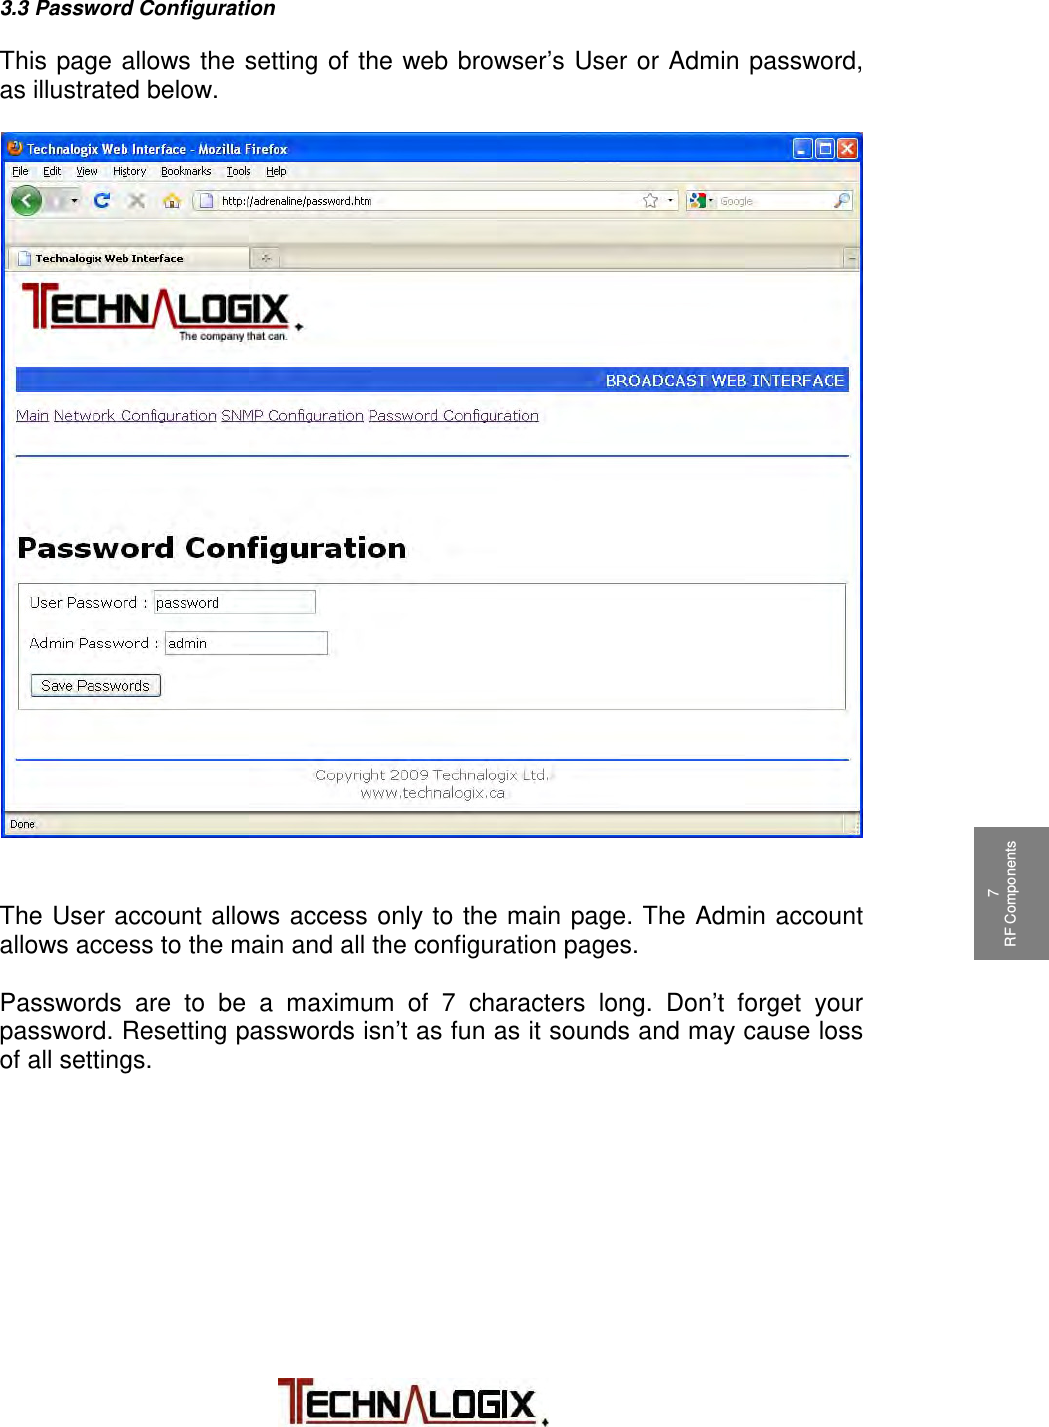           1 Safeguards  2 Terms and Warranty 3 Principle of Operation 4 Installation 5 Operation 6 Control System 7 RF Components 7 RF Components 9 Maintenance 10 Troubleshooting  3.3 Password Configuration  This page allows the setting of the web browser’s User or Admin password, as illustrated below.                             The User account allows access only to the main page. The Admin account allows access to the main and all the configuration pages.  Passwords are to be a maximum of 7 characters long. Don’t forget your password. Resetting passwords isn’t as fun as it sounds and may cause loss of all settings. 